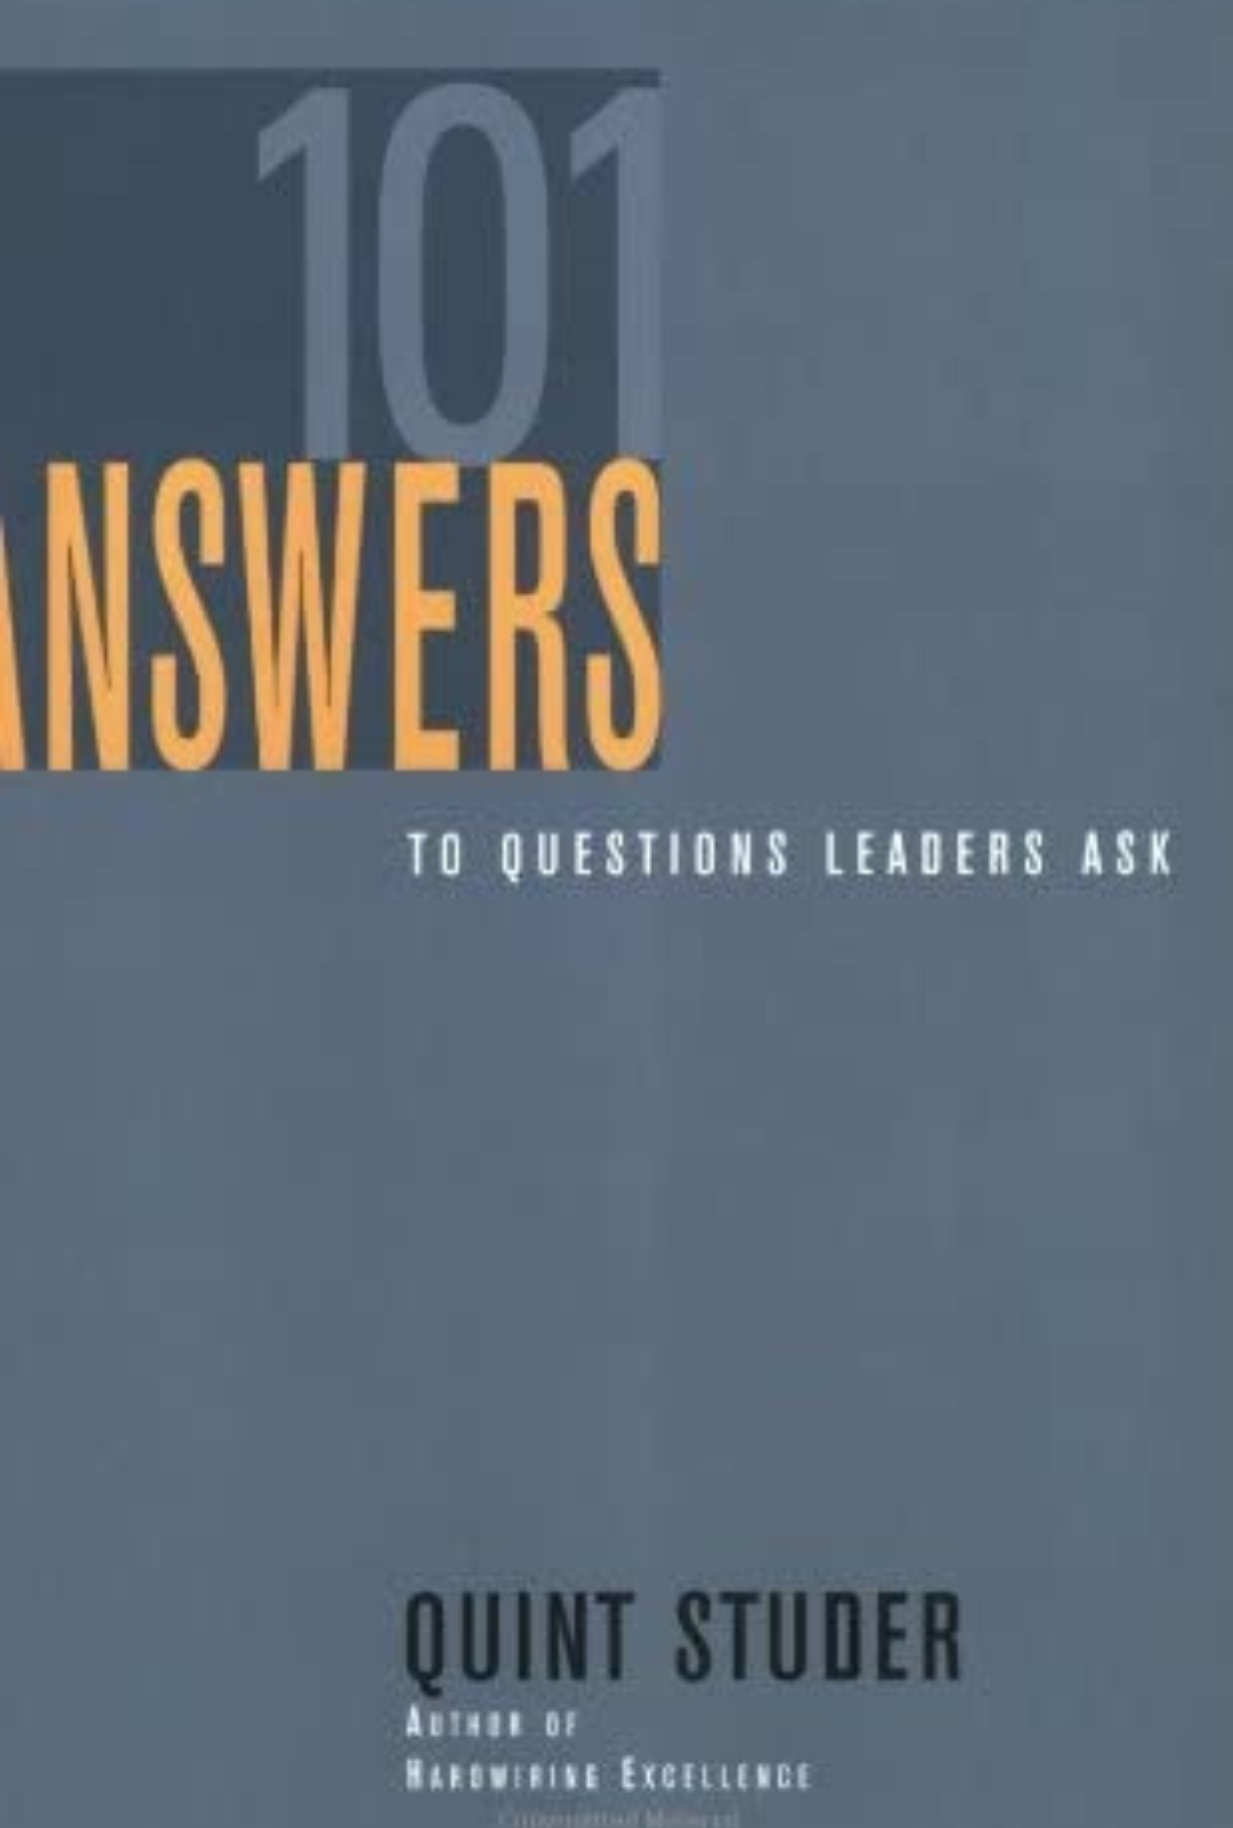 101 Answers to Questions Leaders Ask by Quint Studer